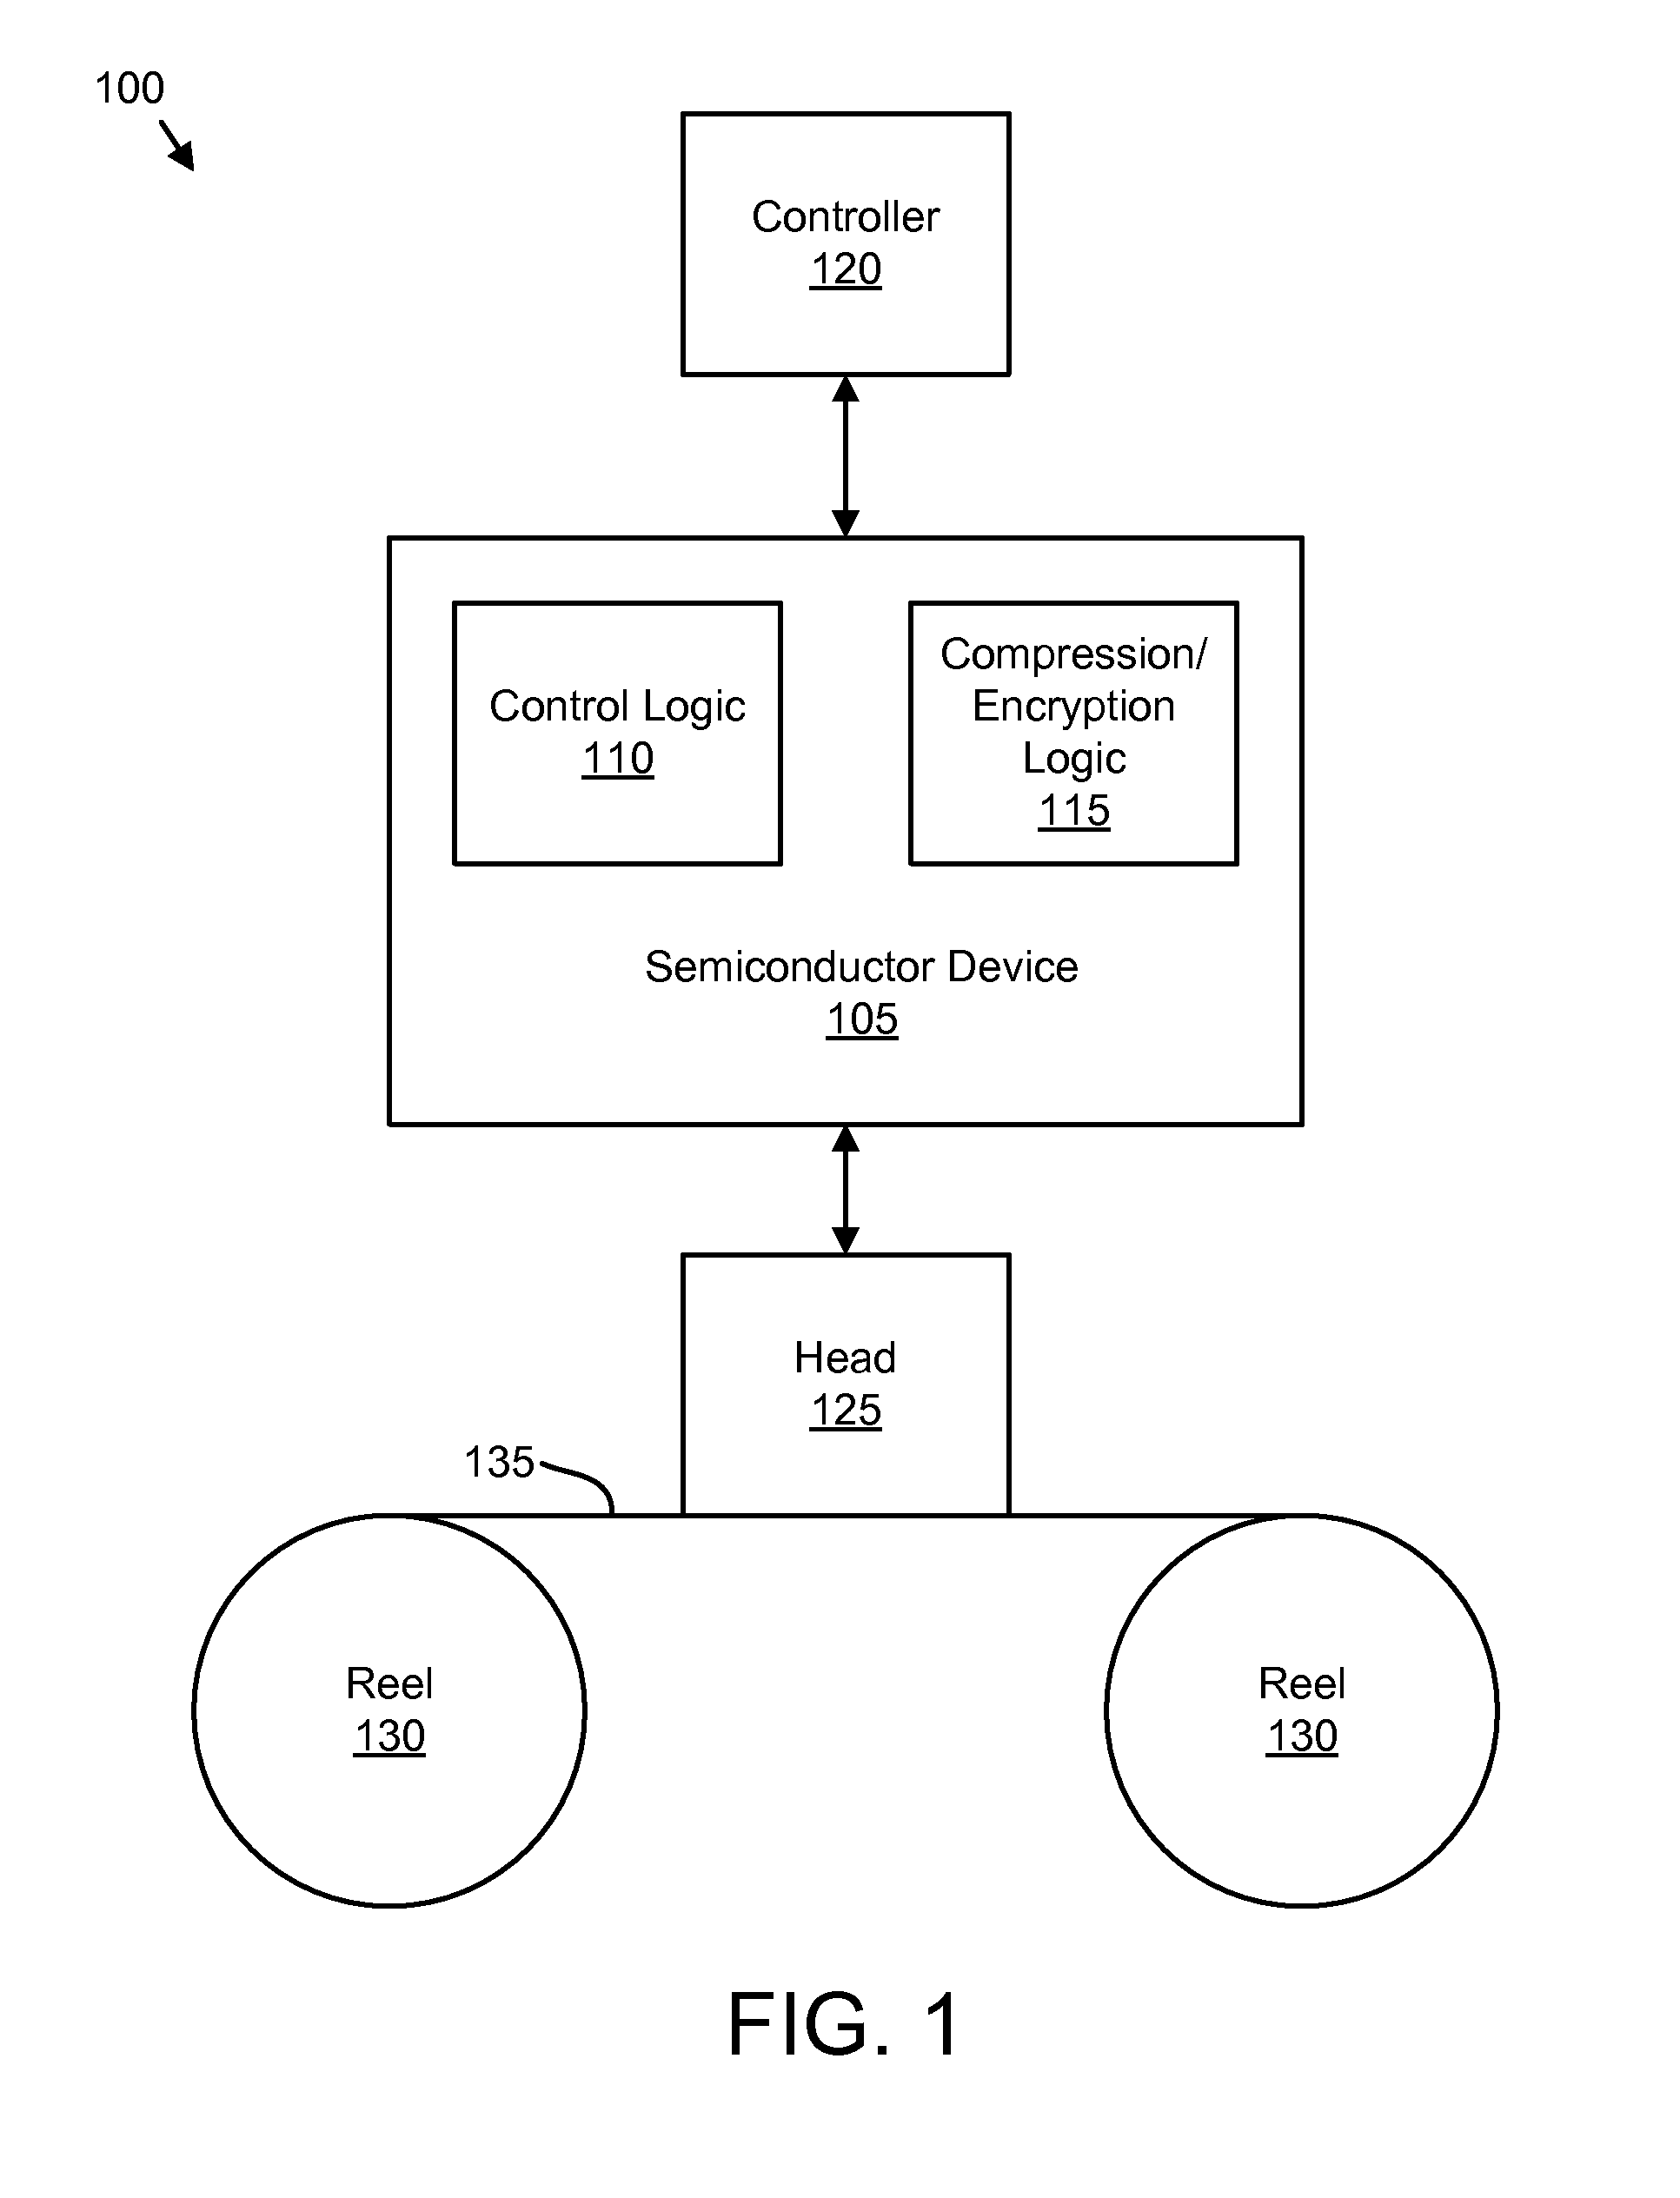 Apparatus, system, and method for testing data compression and data encryption circuitry